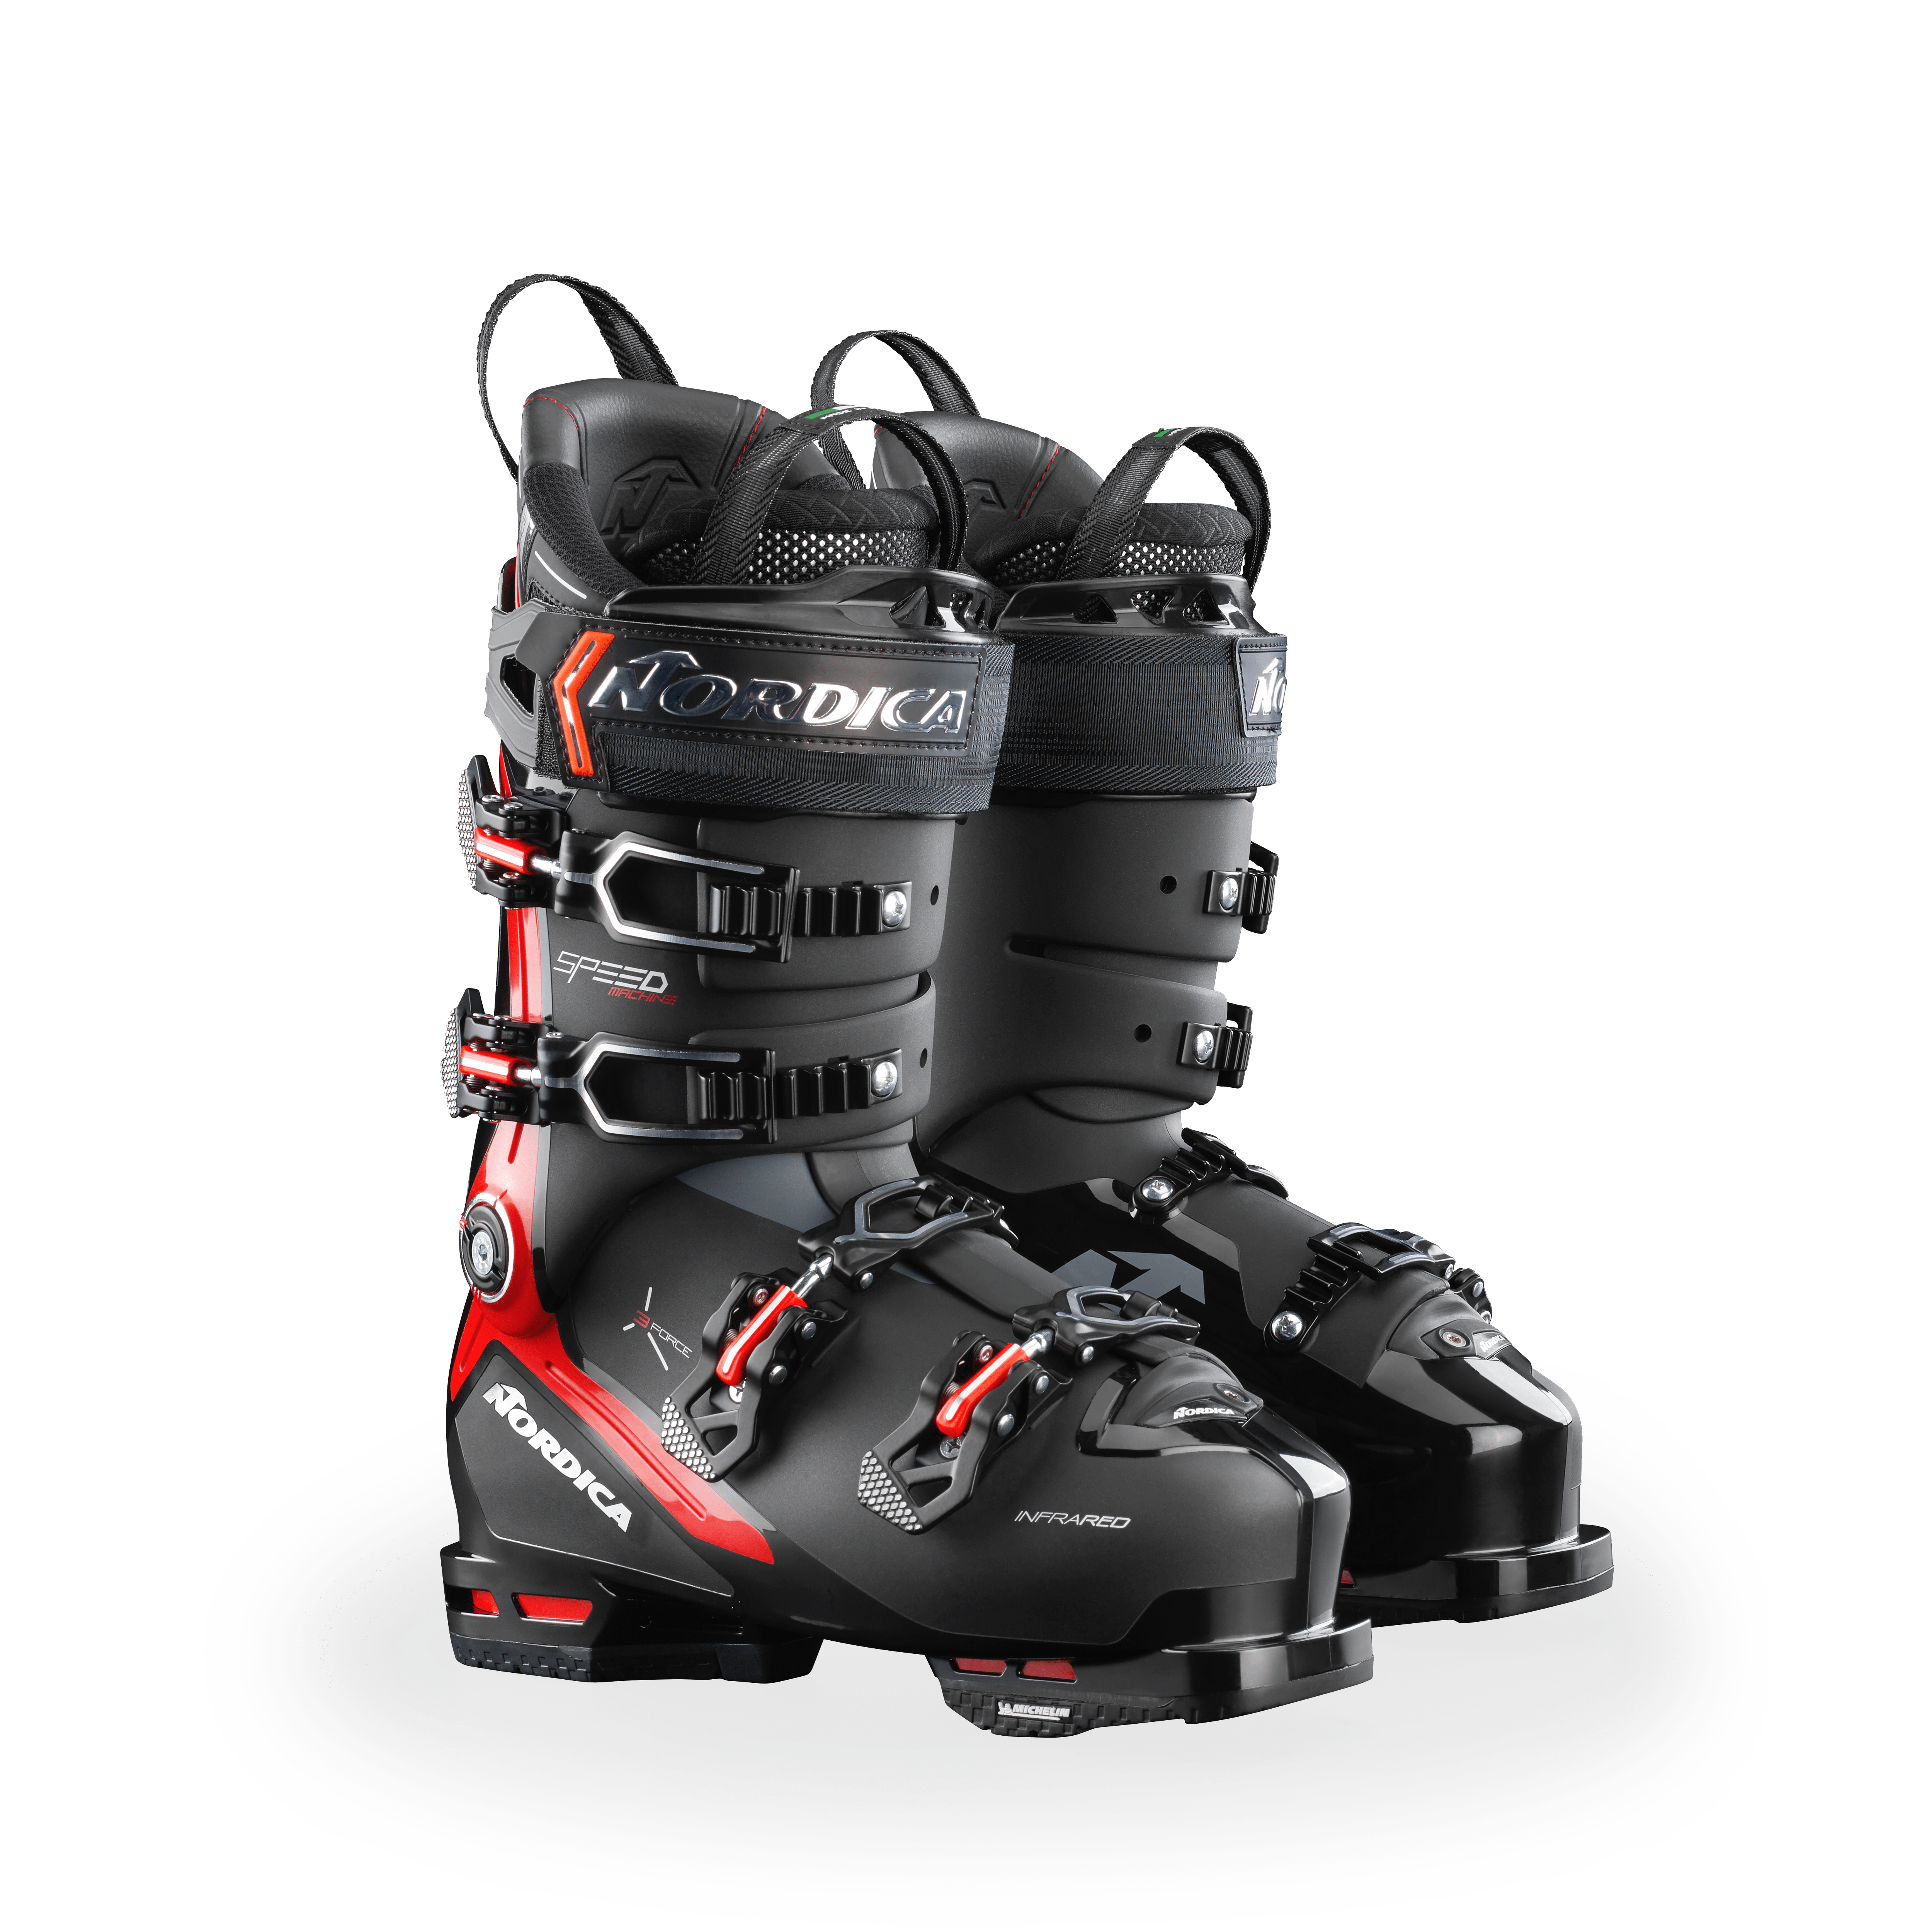 Speedmachine 3 130 S (GW) - Nordica - Skis and Boots – Official